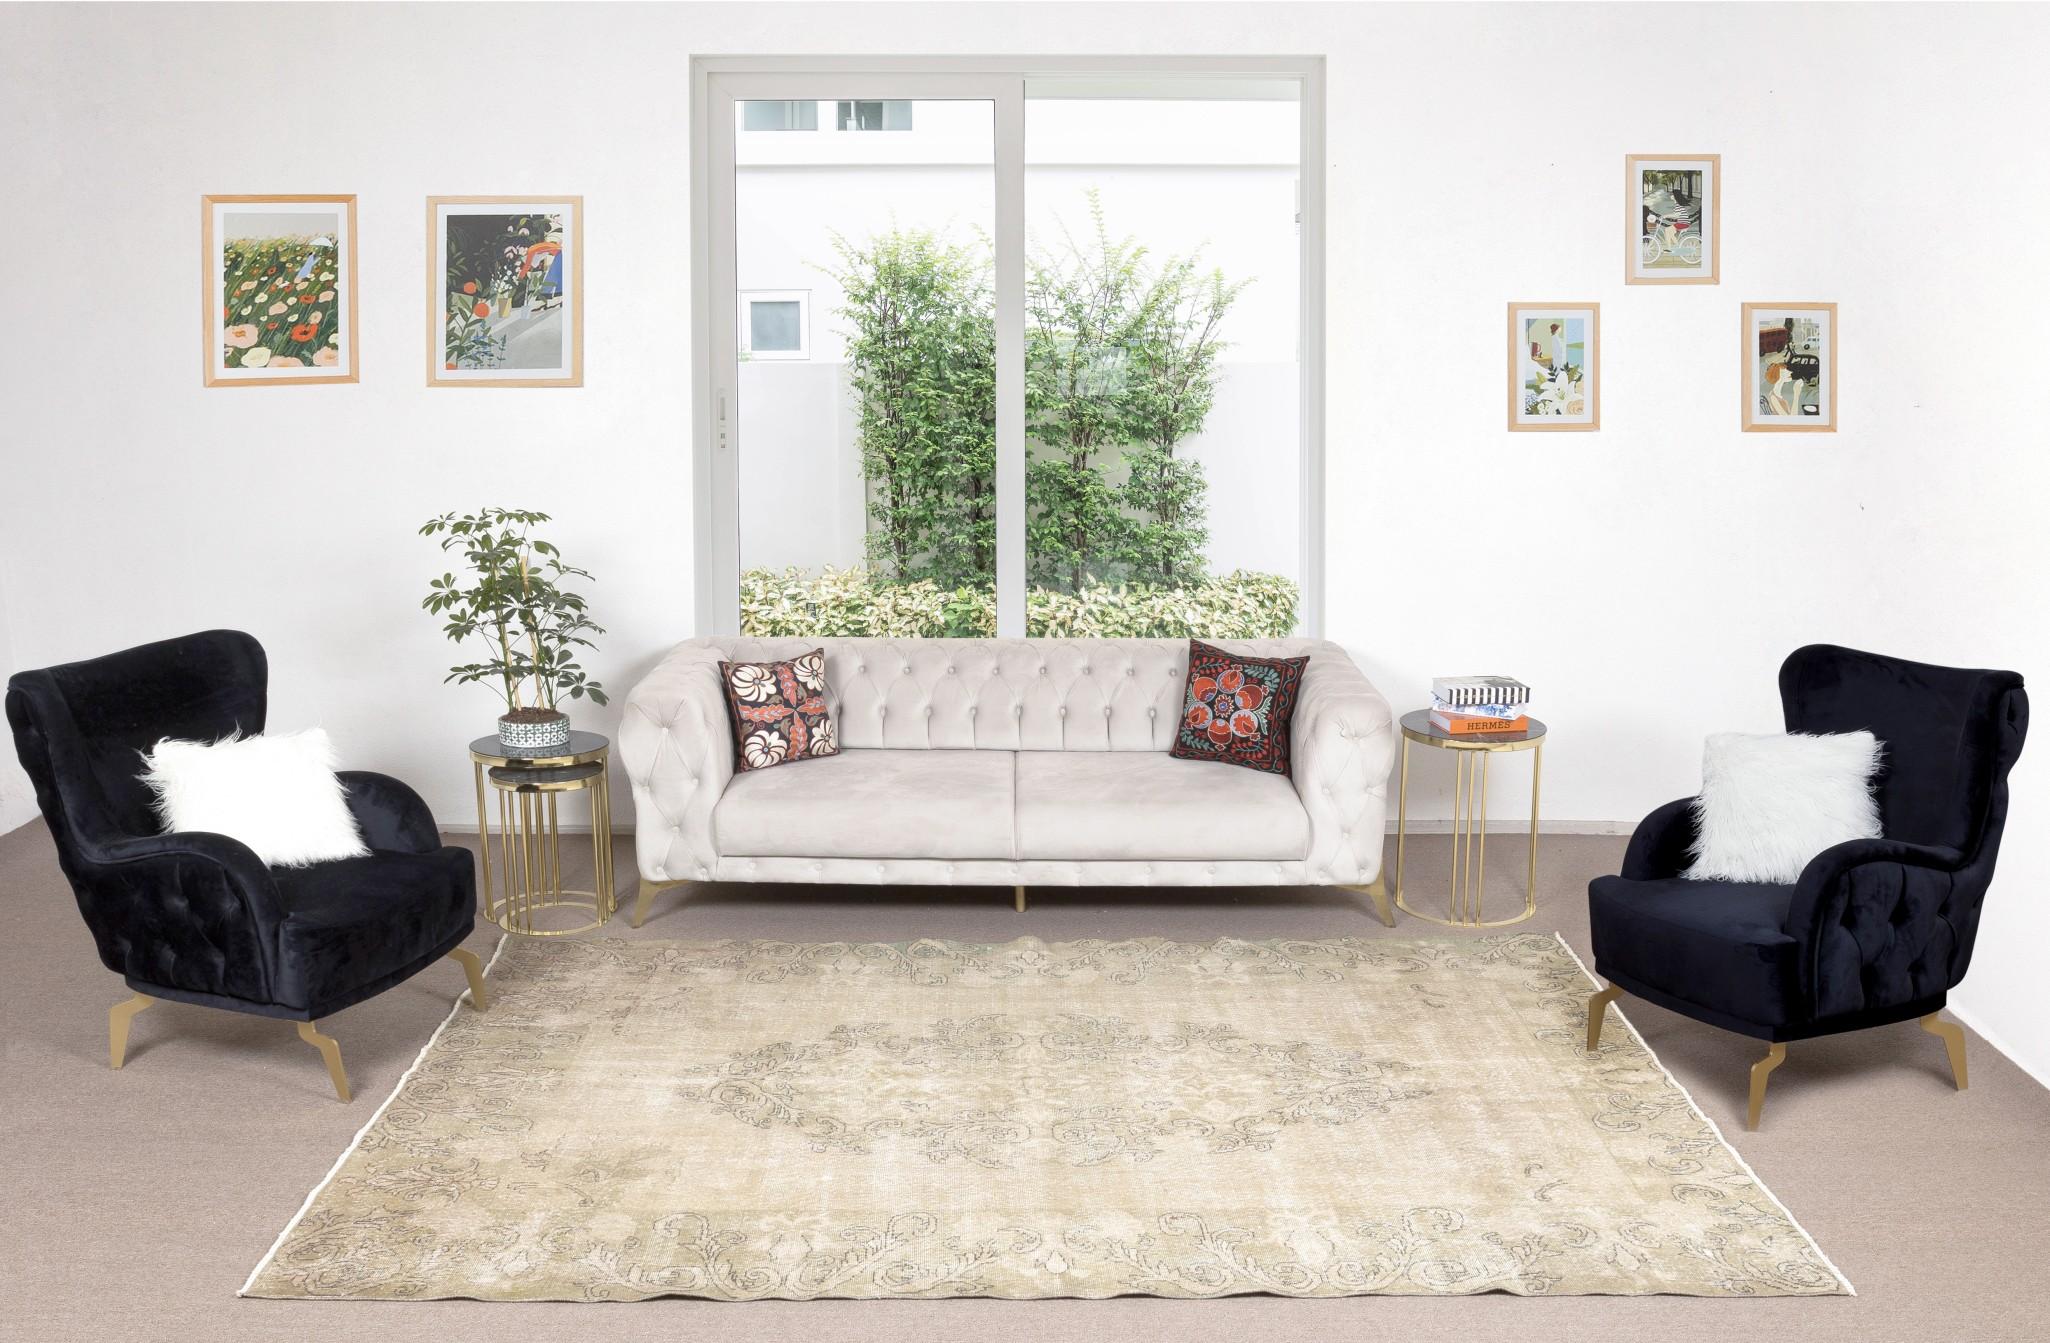 Our sun-faded rugs are all one-of-a-kind, hand-knotted, 50-70 year-old vintage pieces. They each boast their own singular handmade aesthetic drawn from the centuries-old Turkish rug-weaving traditions. These rugs are made completely of sheep’s wool,